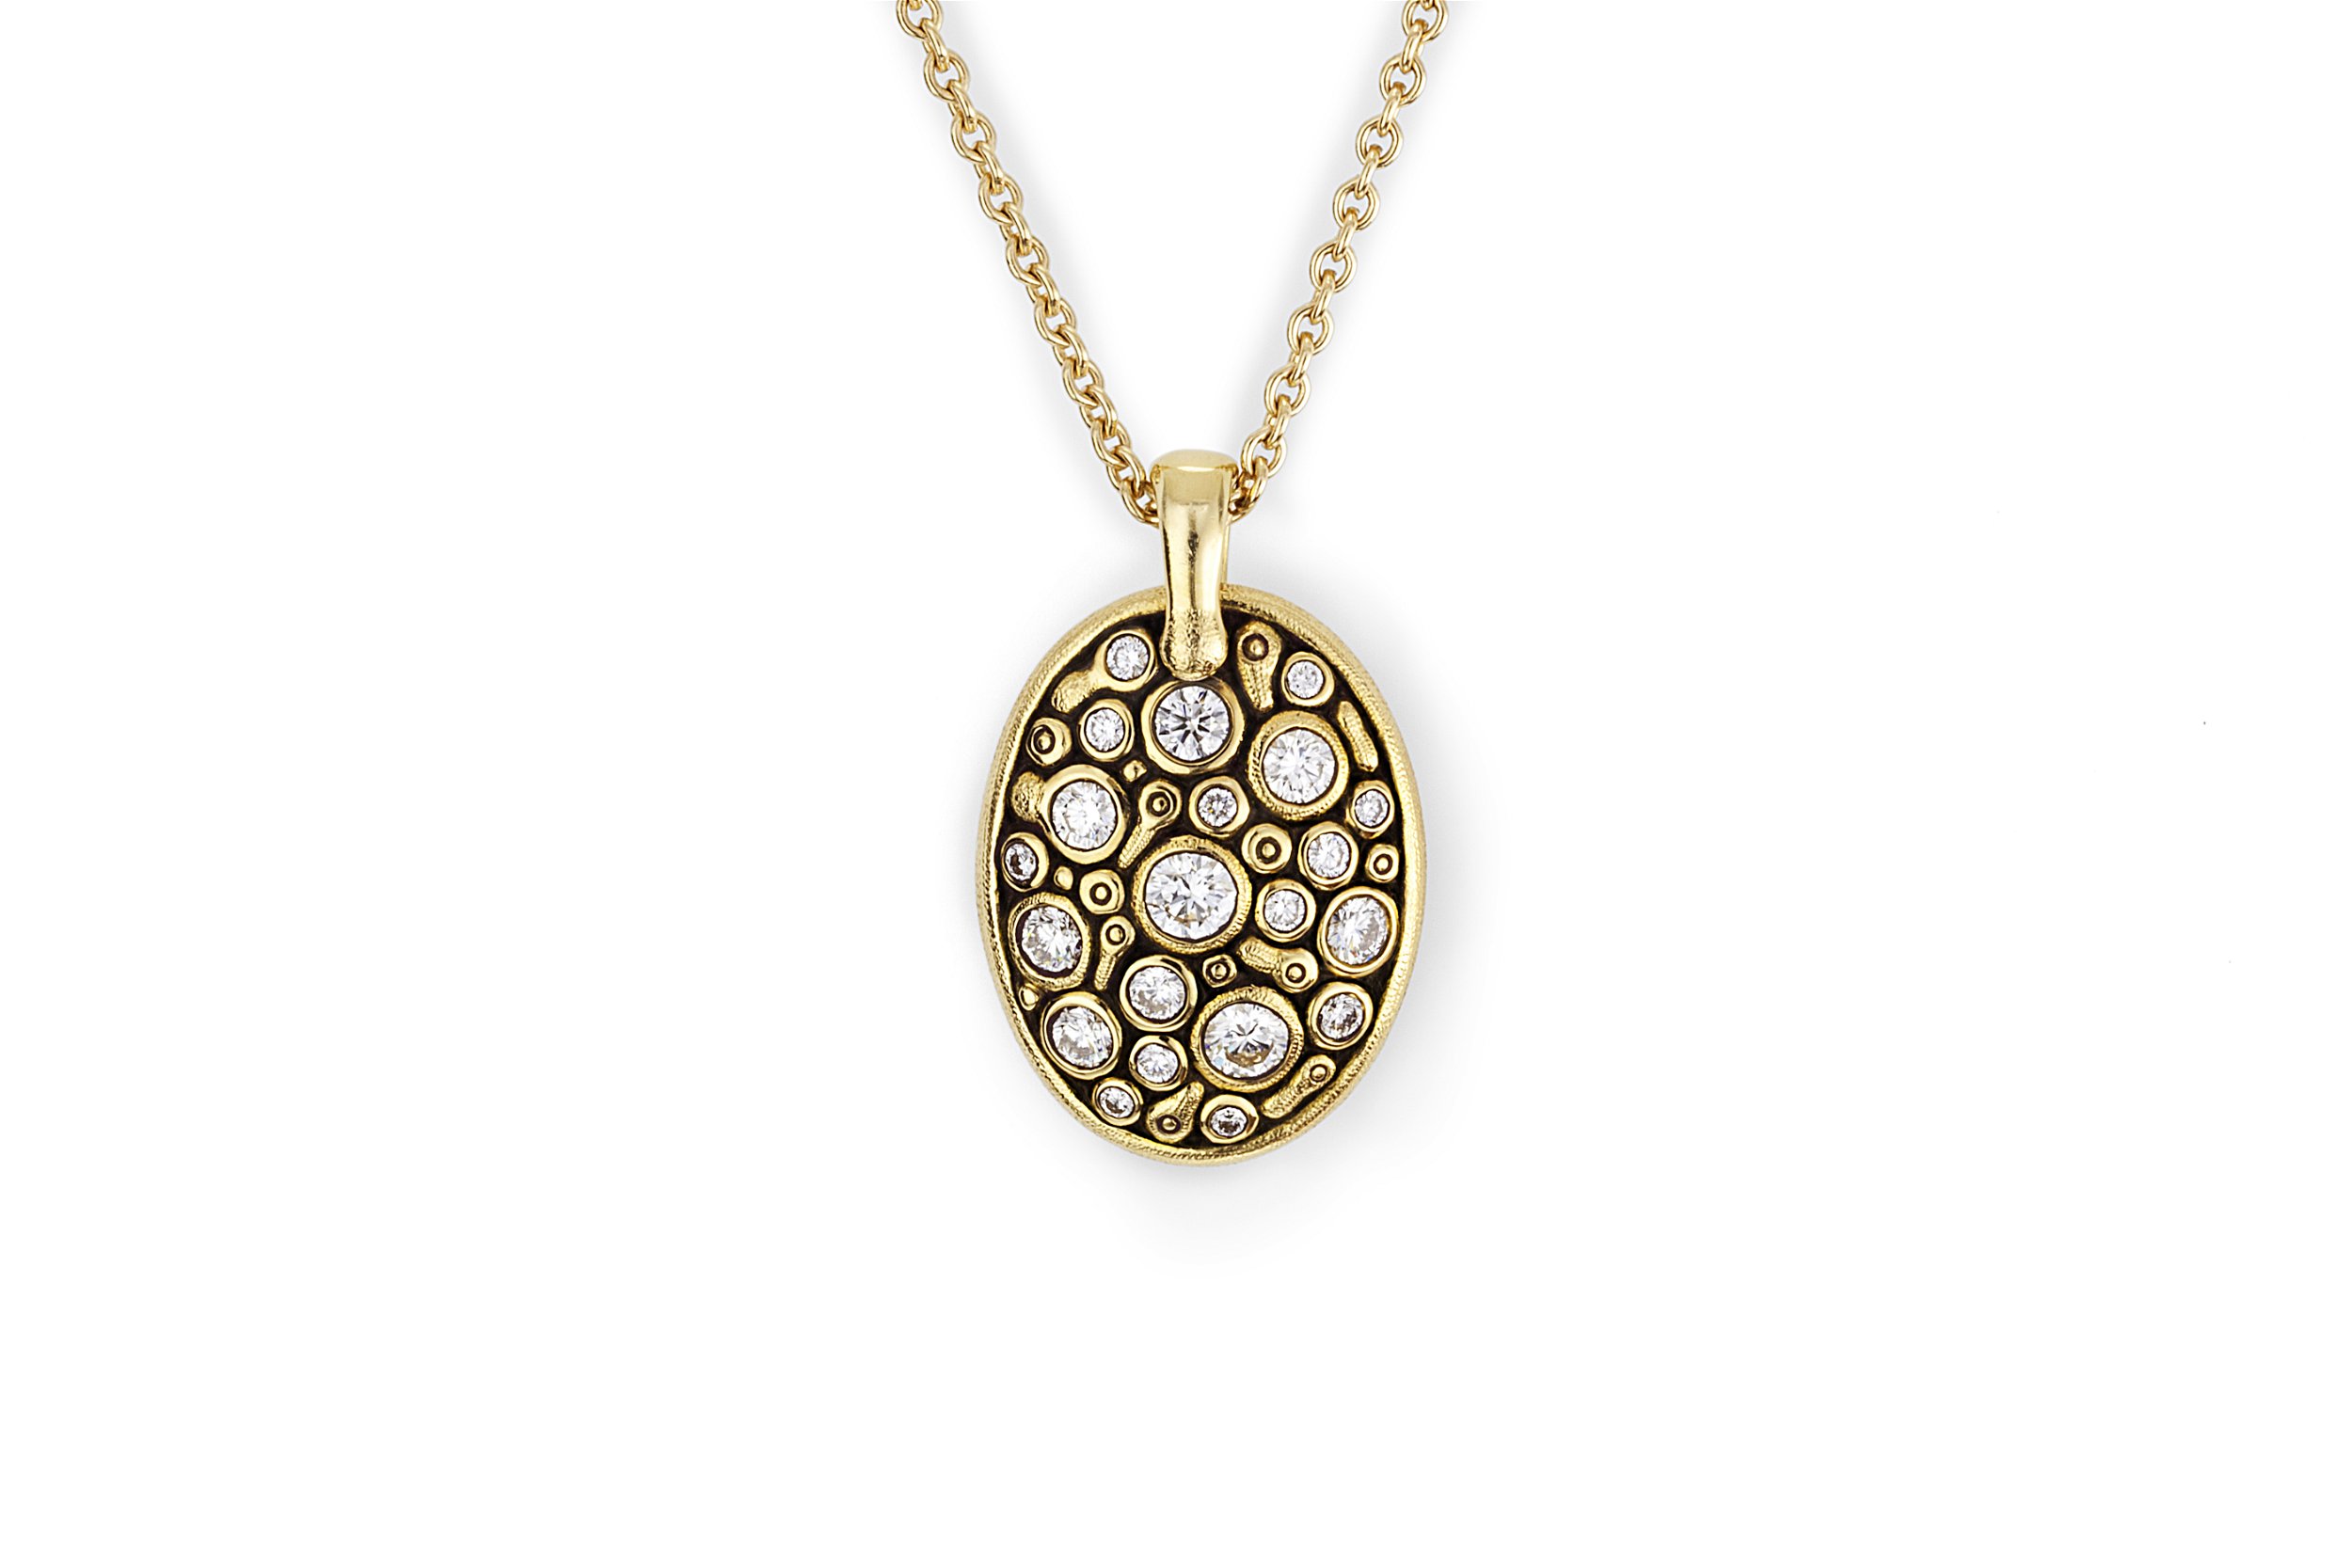 Constellation Pendant Necklace with White Diamonds in 18kt Yellow Gold